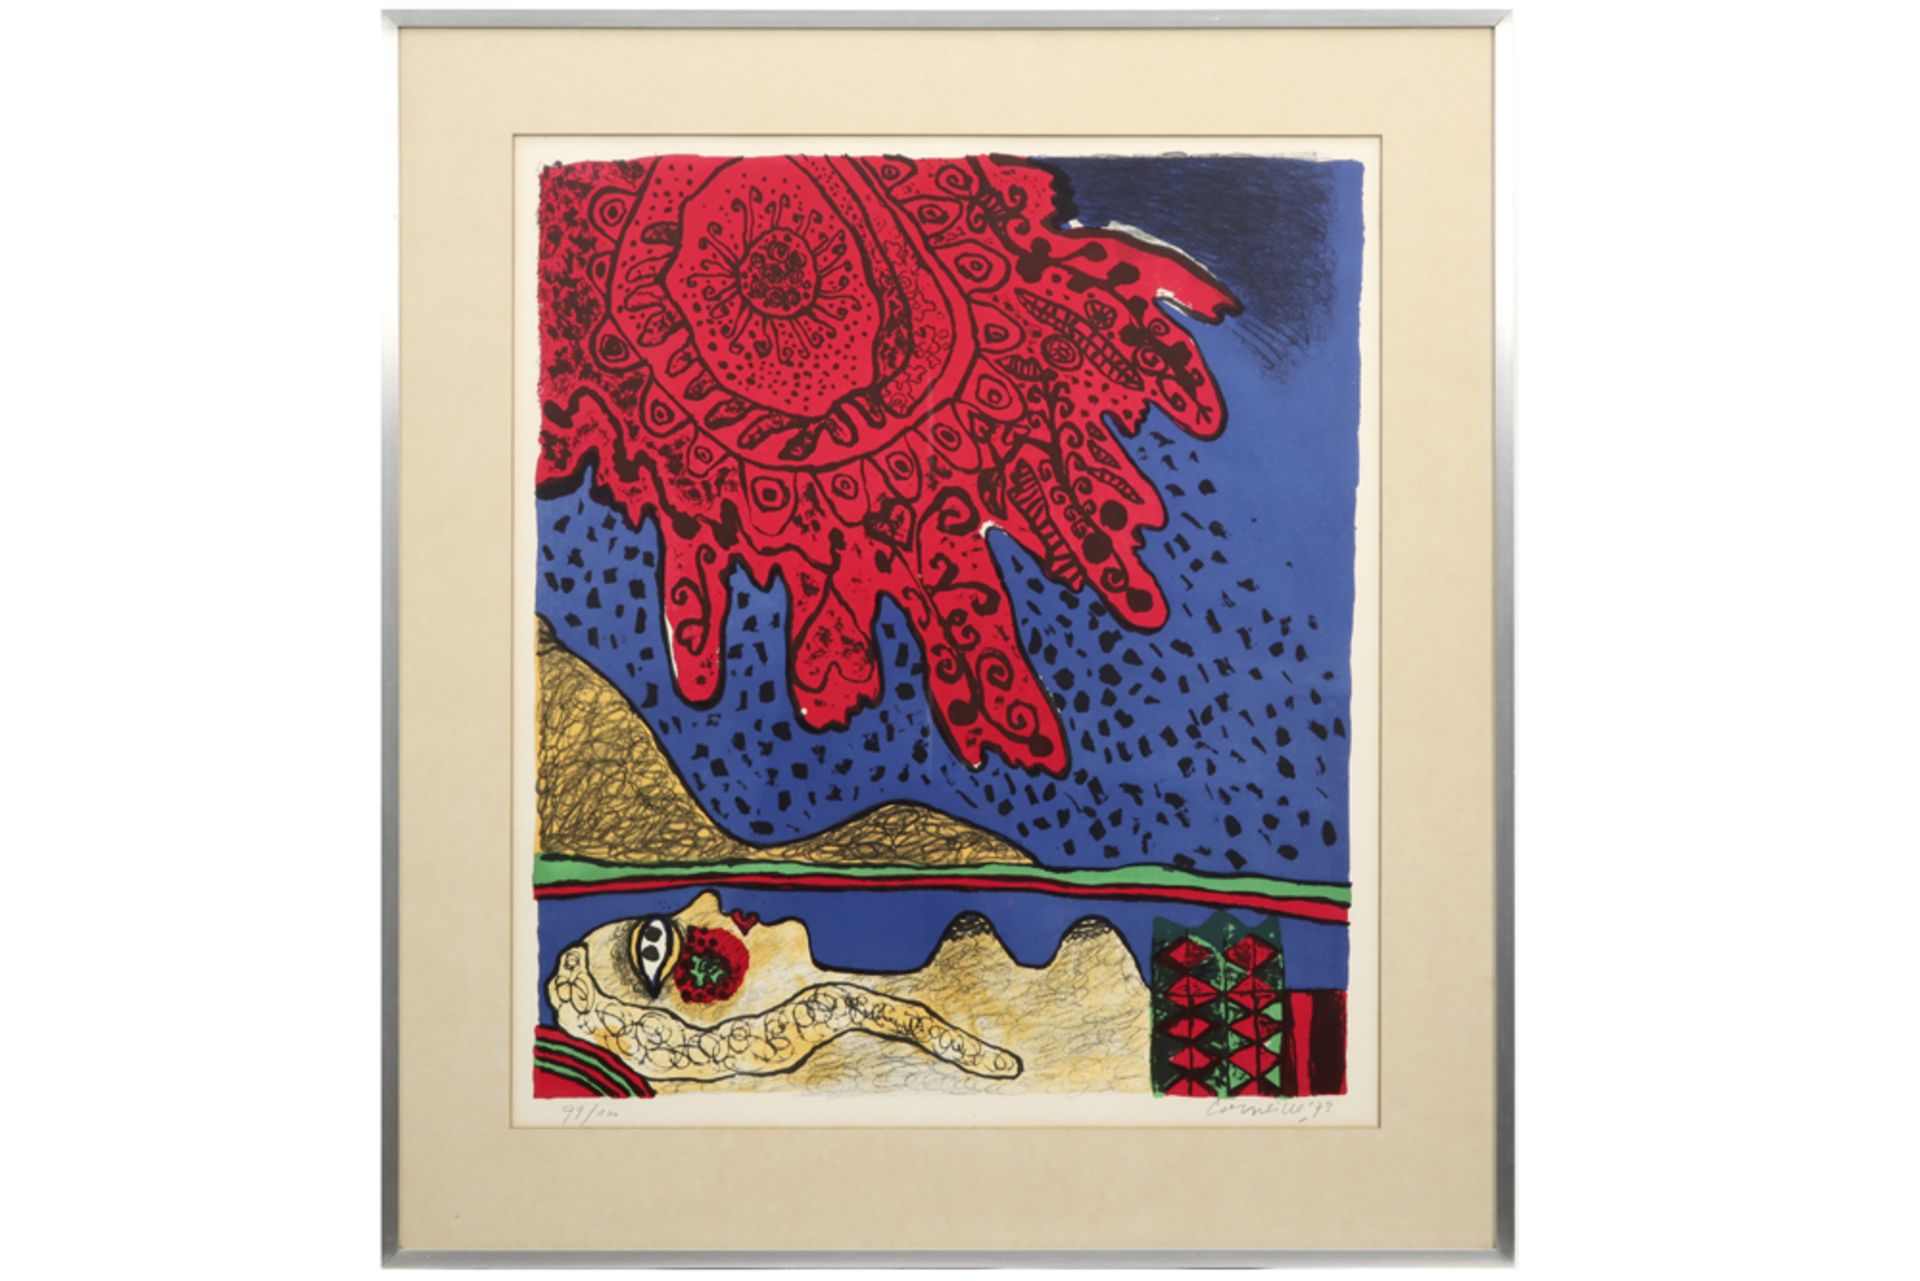 Corneille signed lithograph printed in colors dated 1973 || CORNEILLE (1922 - 2010) (1922 - 2010) - Image 3 of 3